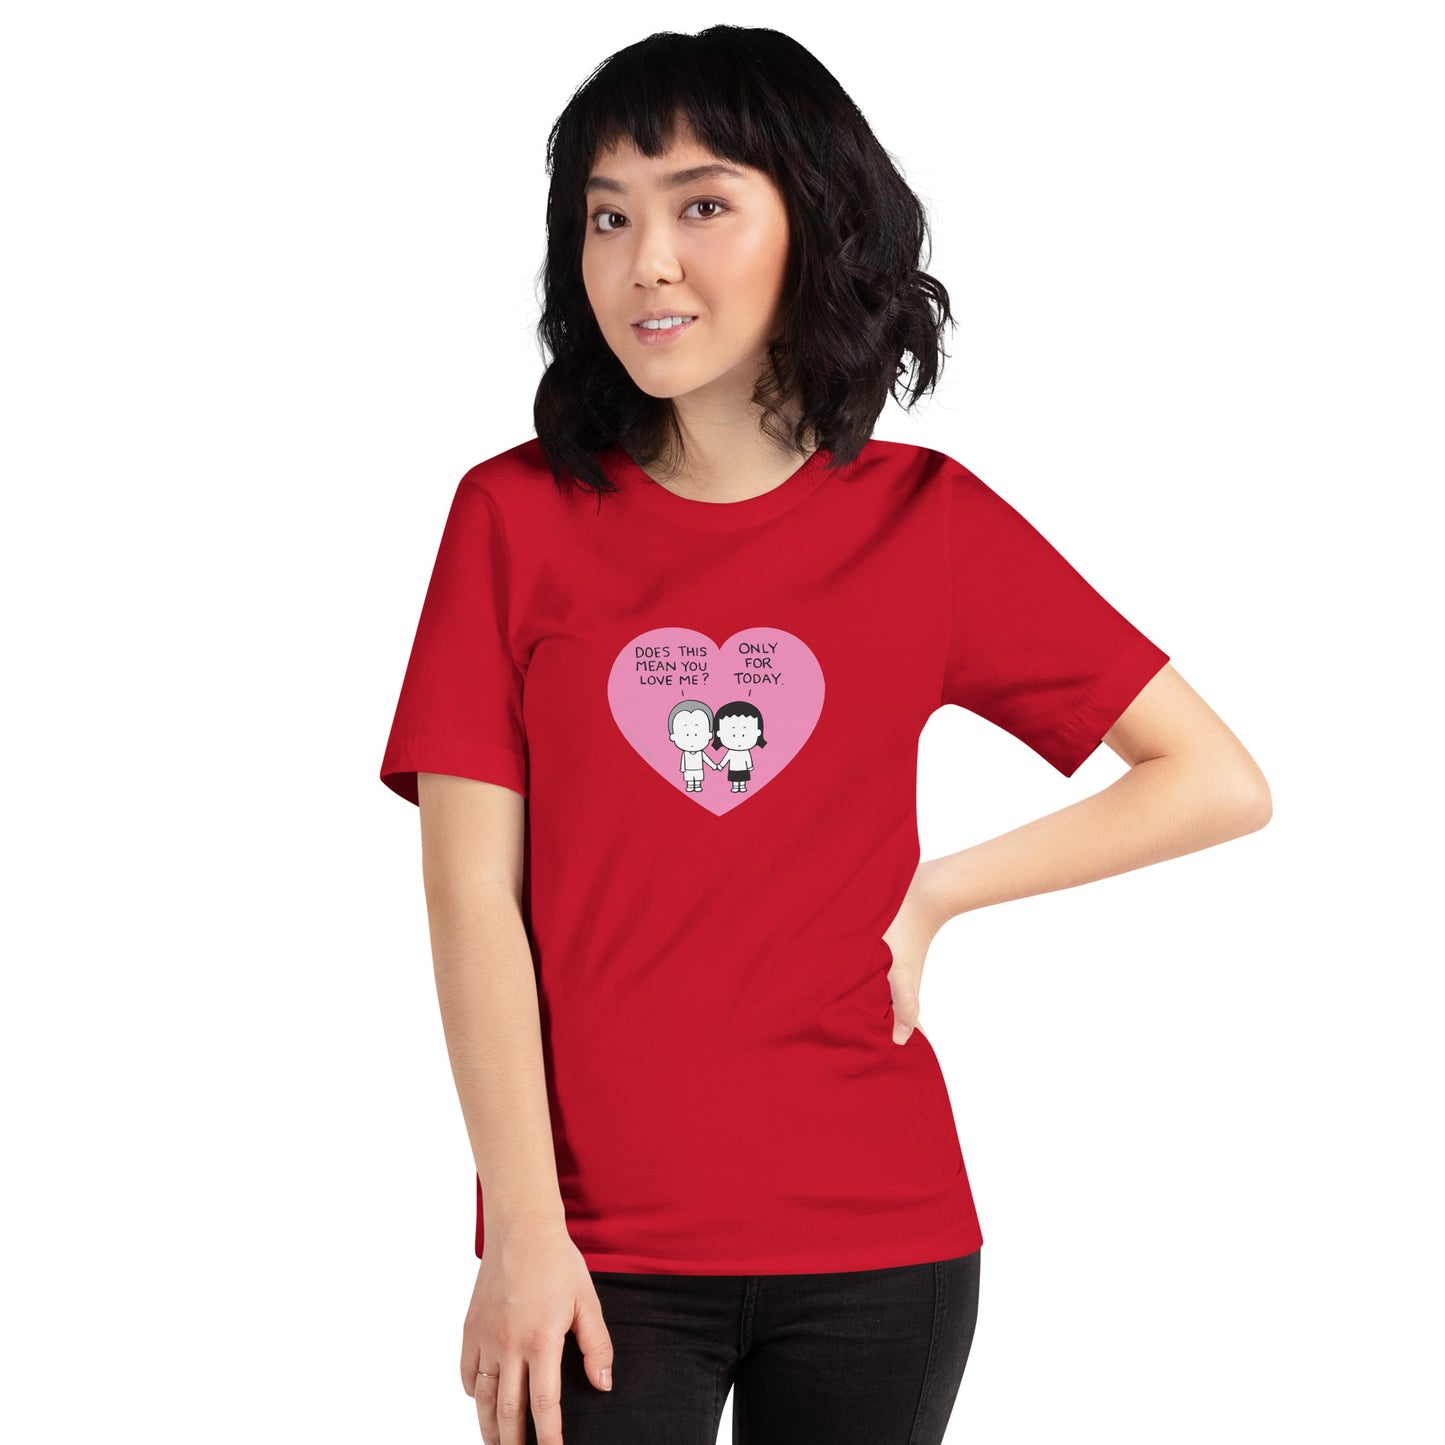 Love For Today unisex t-shirt